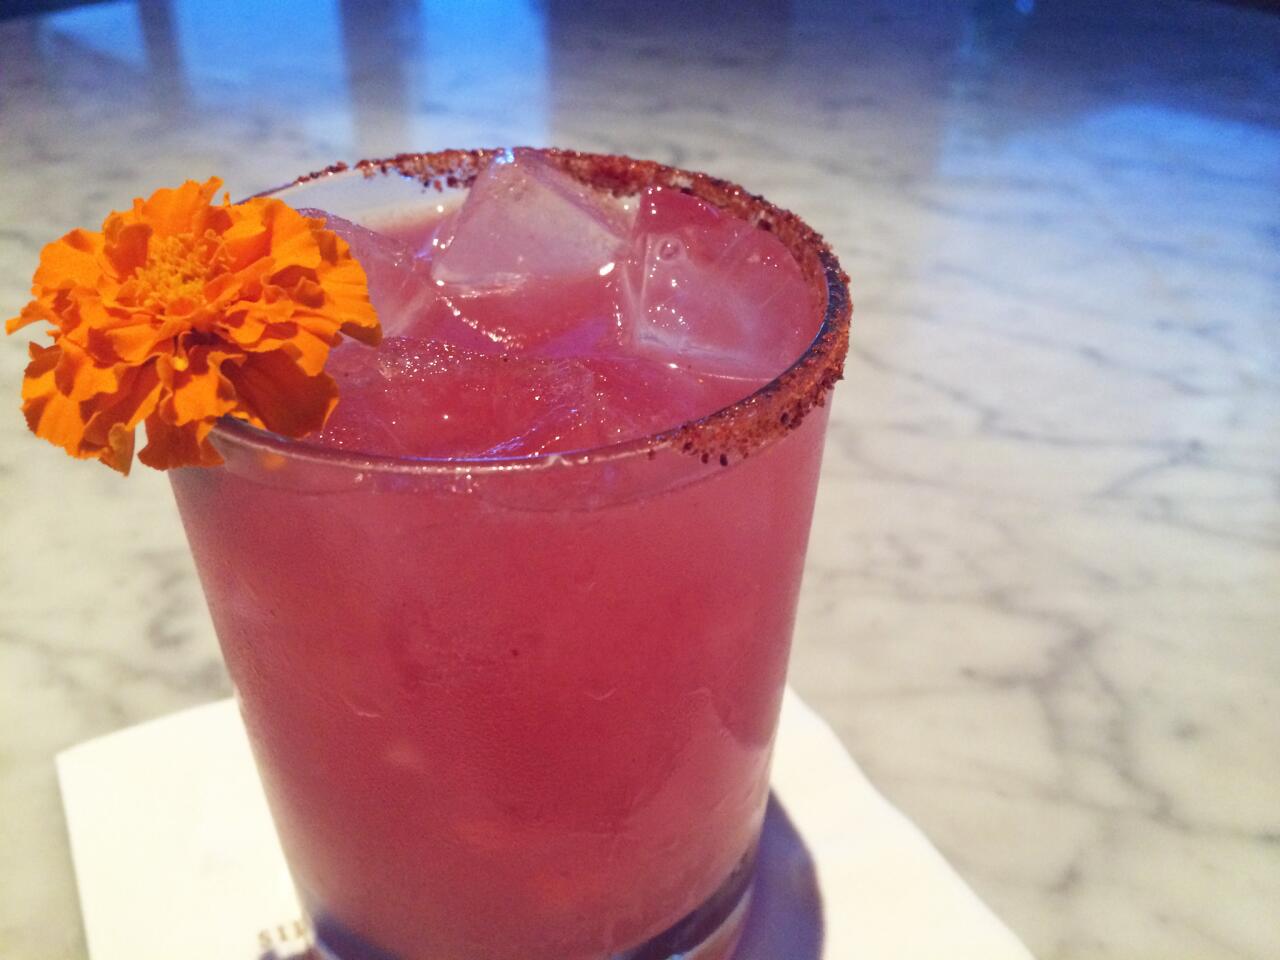 The Jasmine Margarita with Casamigos tequila, pomegranate and sal de gusano.